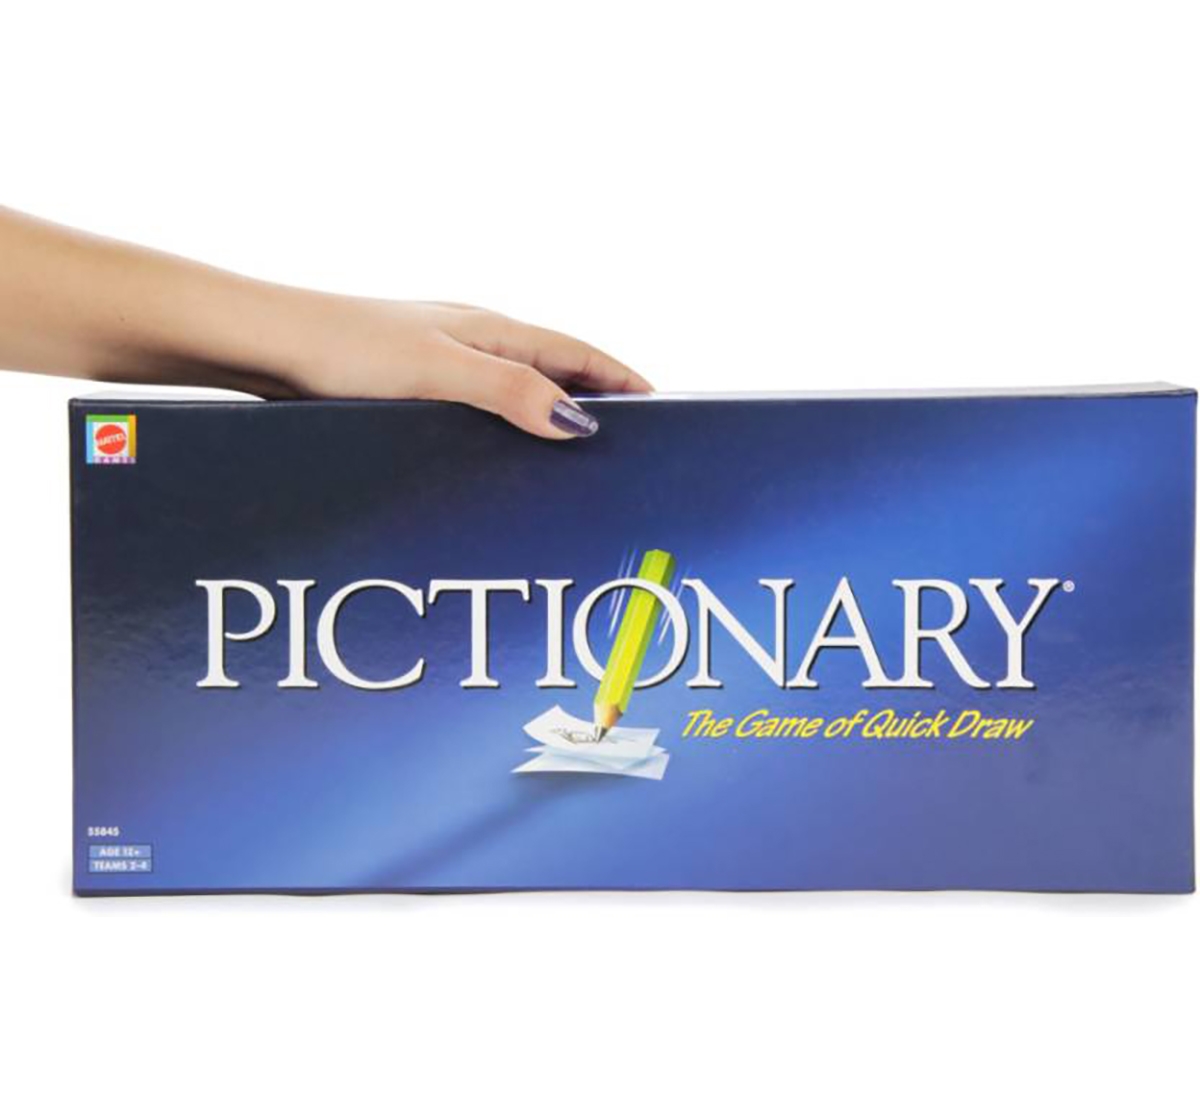 Pictionary, The Classic Board Game of Quick Draw – ToyXpress